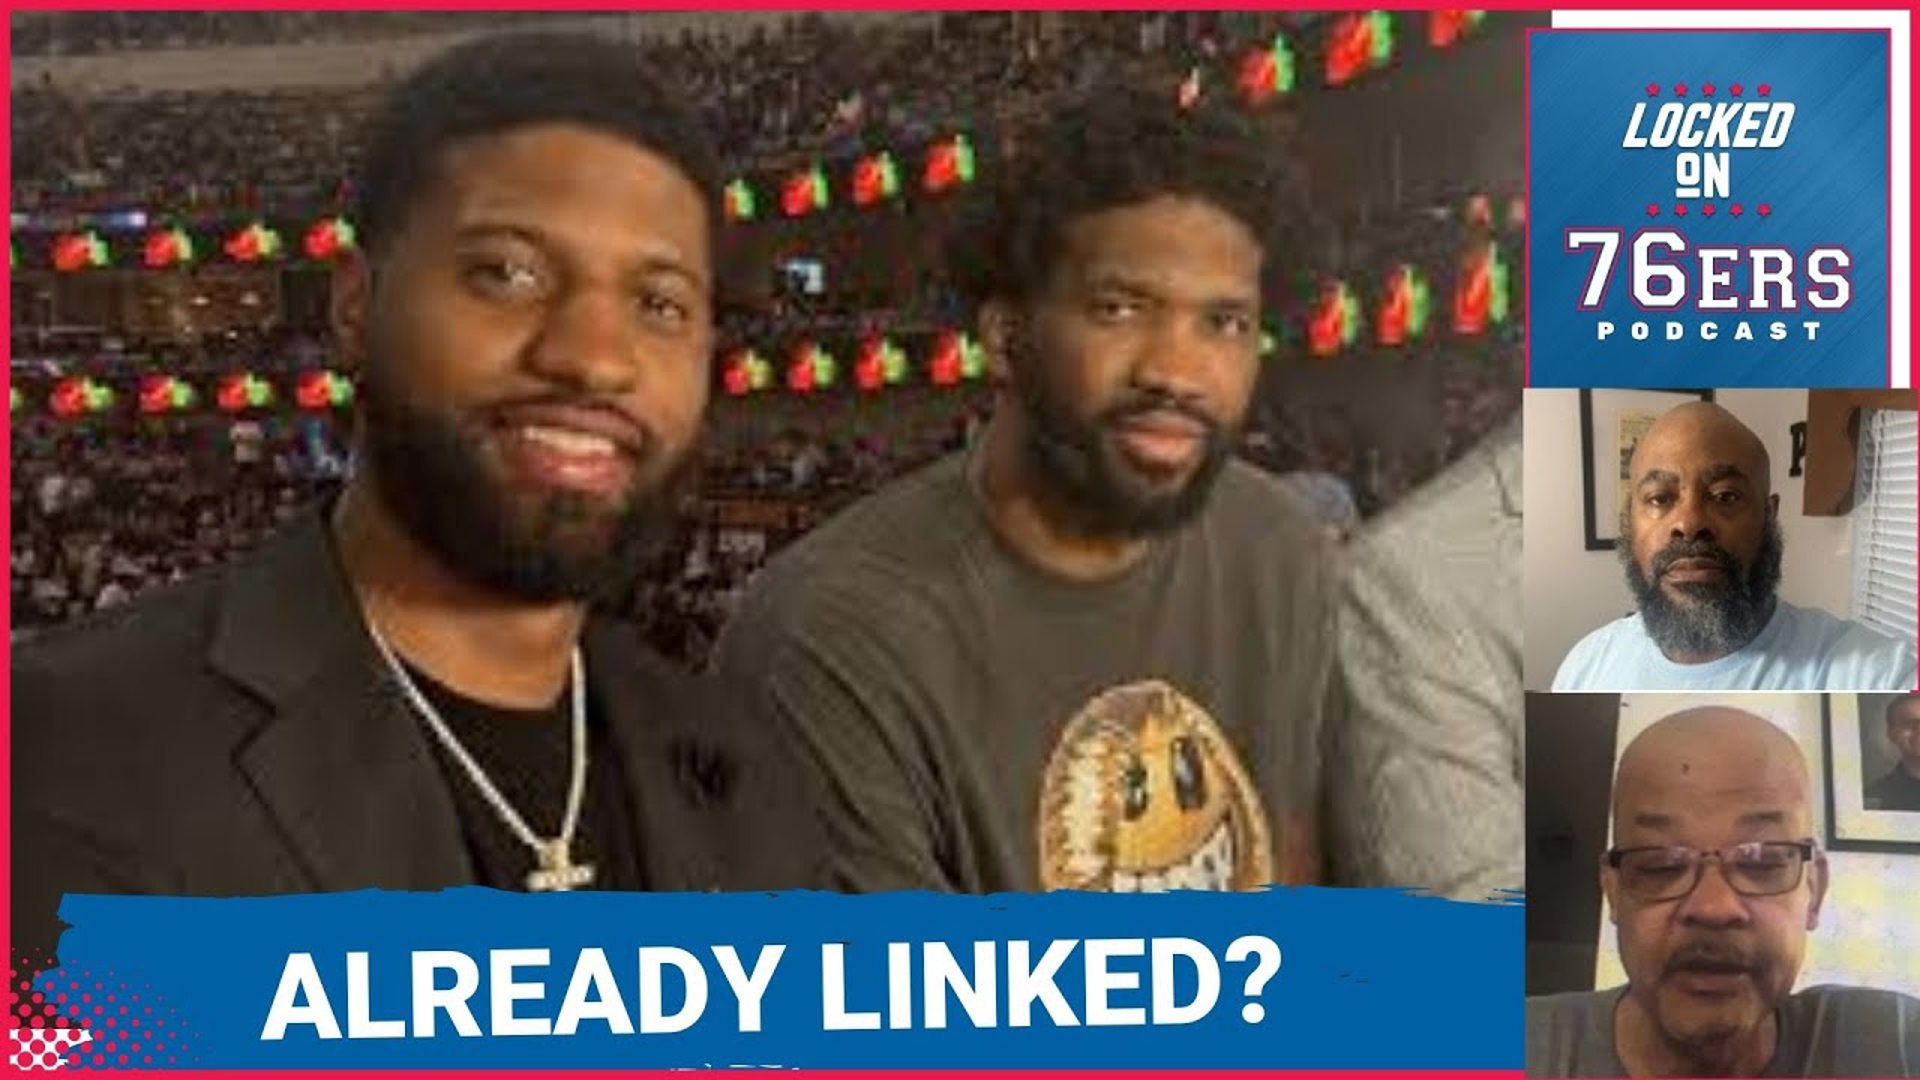 Joel Embiid's recruitment of Paul George to the Sixers; Cam Payne gets arrested in Arizona